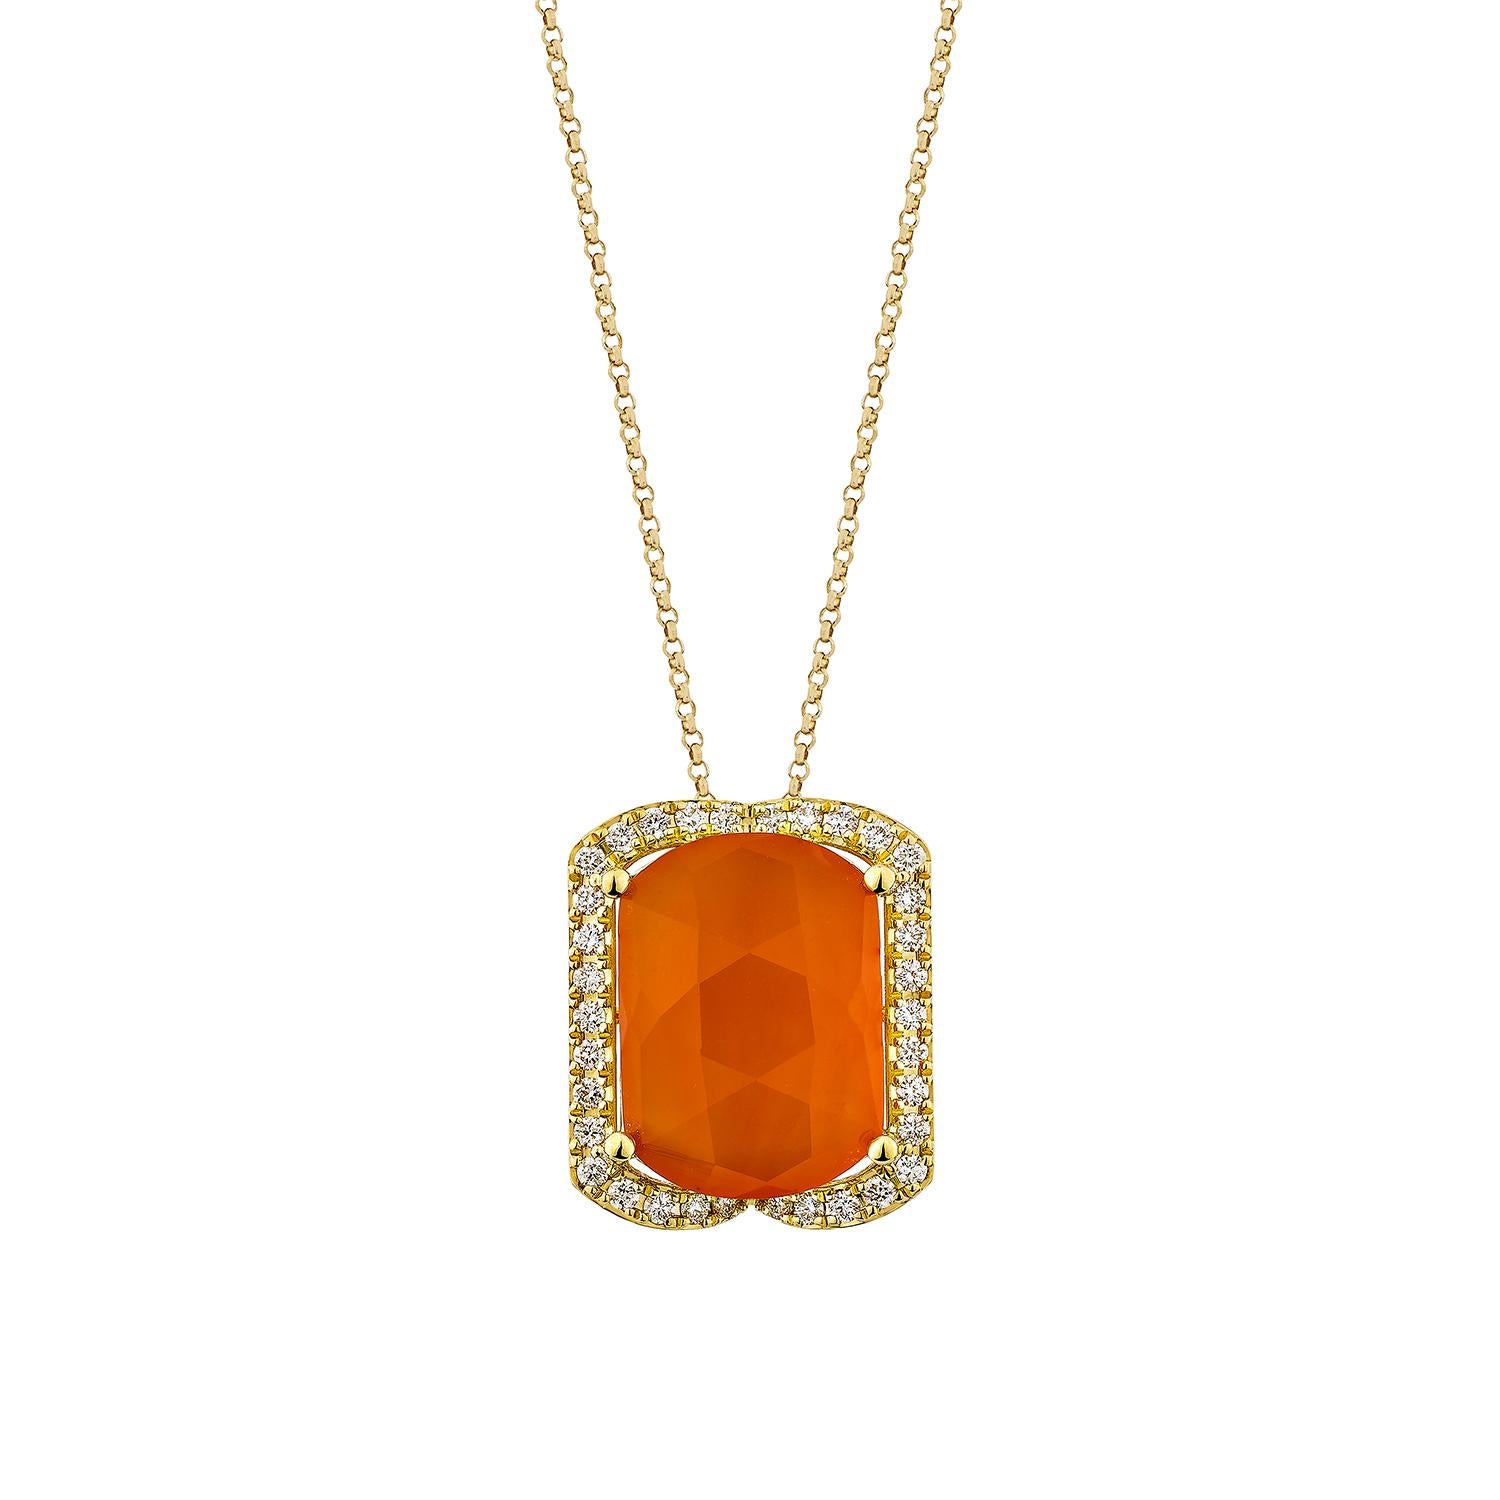 Contemporary 6.15 Carat Carnelian Pendant in 18Karat Yellow Gold with White Diamond. For Sale